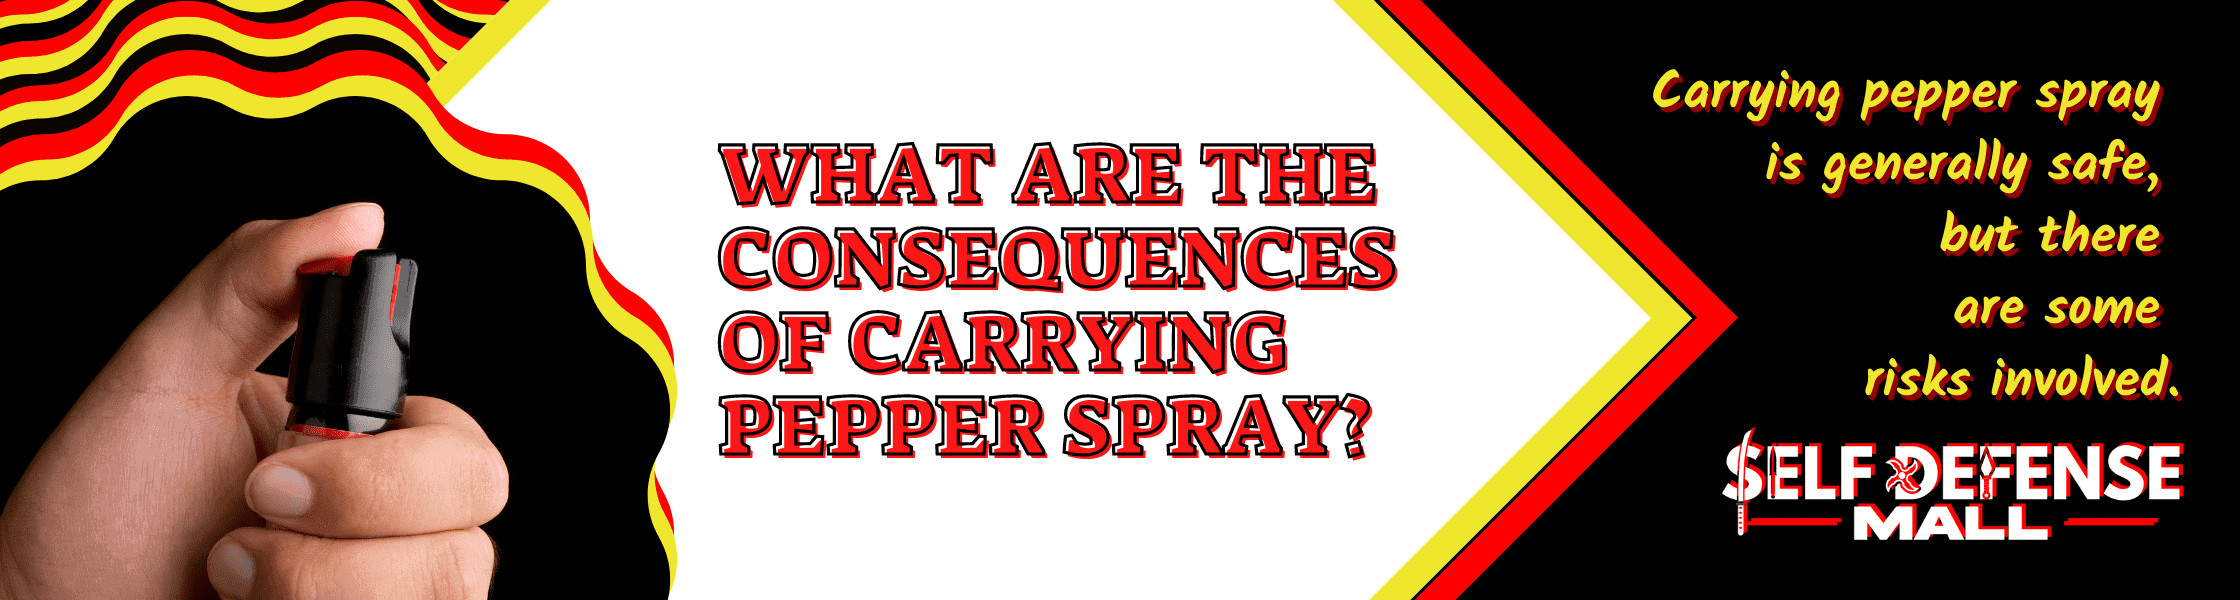 What are the consequences of carrying pepper spray_